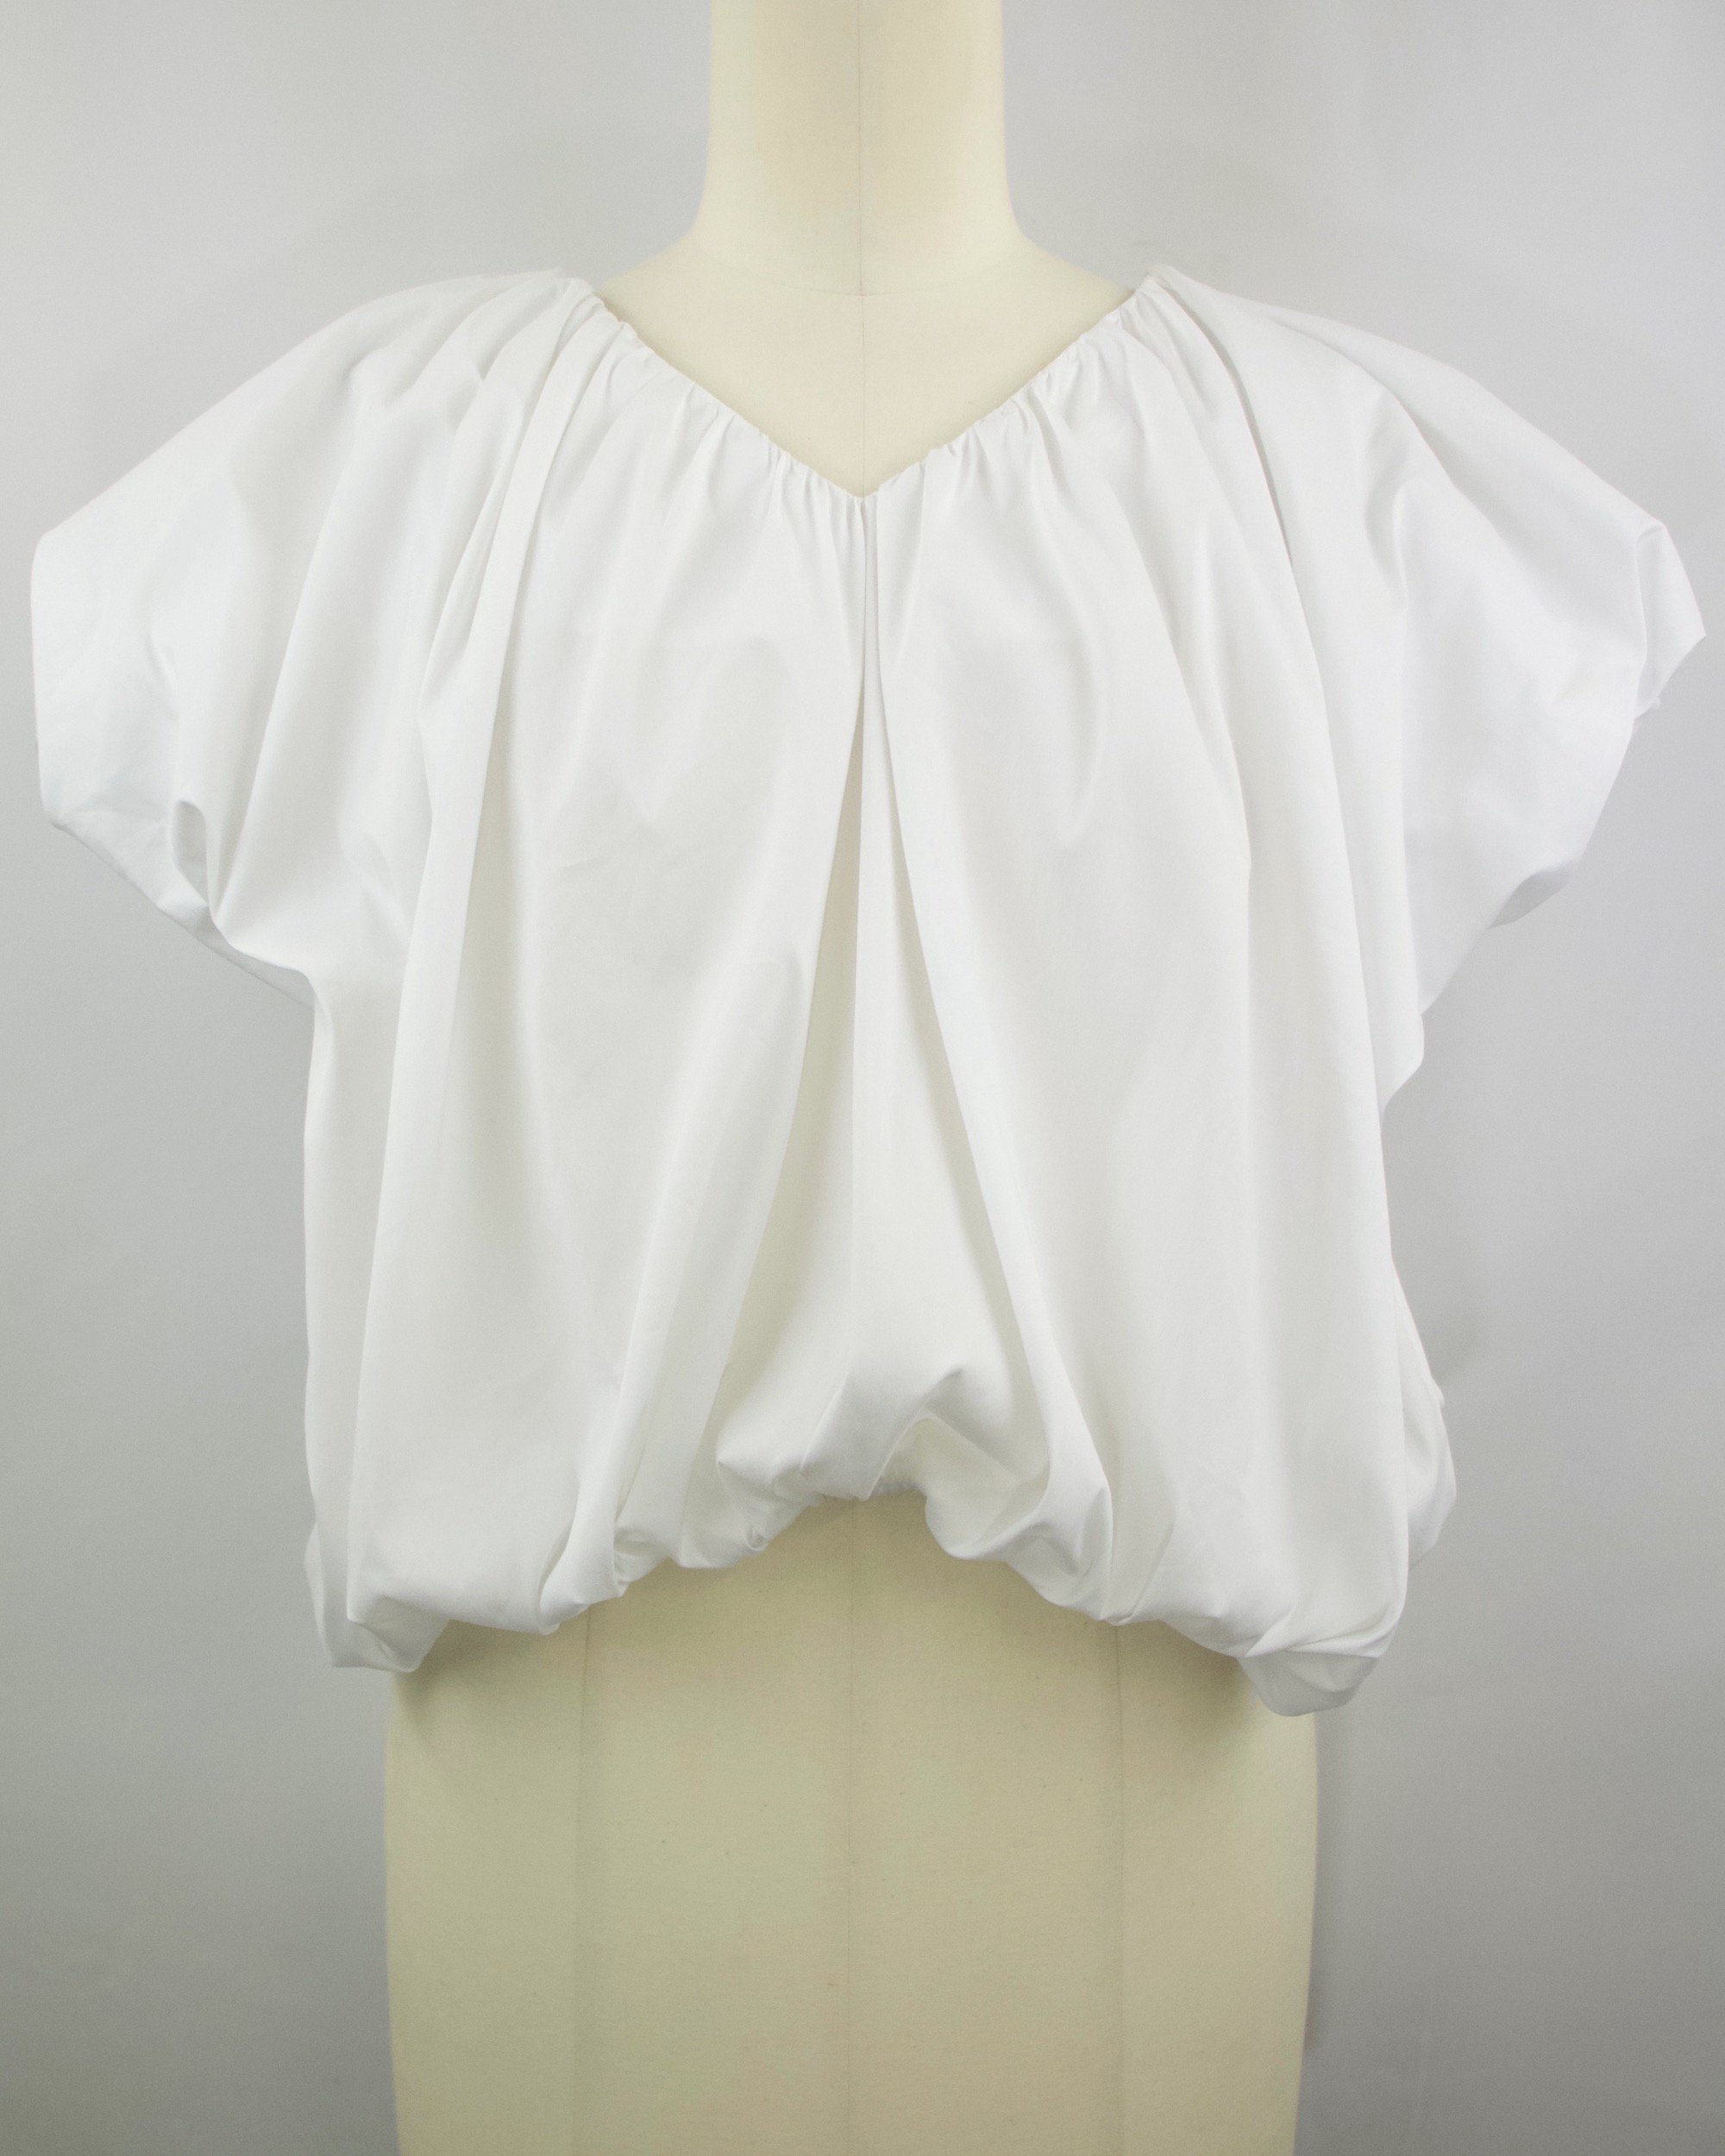 <img class='new_mark_img1' src='https://img.shop-pro.jp/img/new/icons47.gif' style='border:none;display:inline;margin:0px;padding:0px;width:auto;' />f’s6 Balloon Blouse